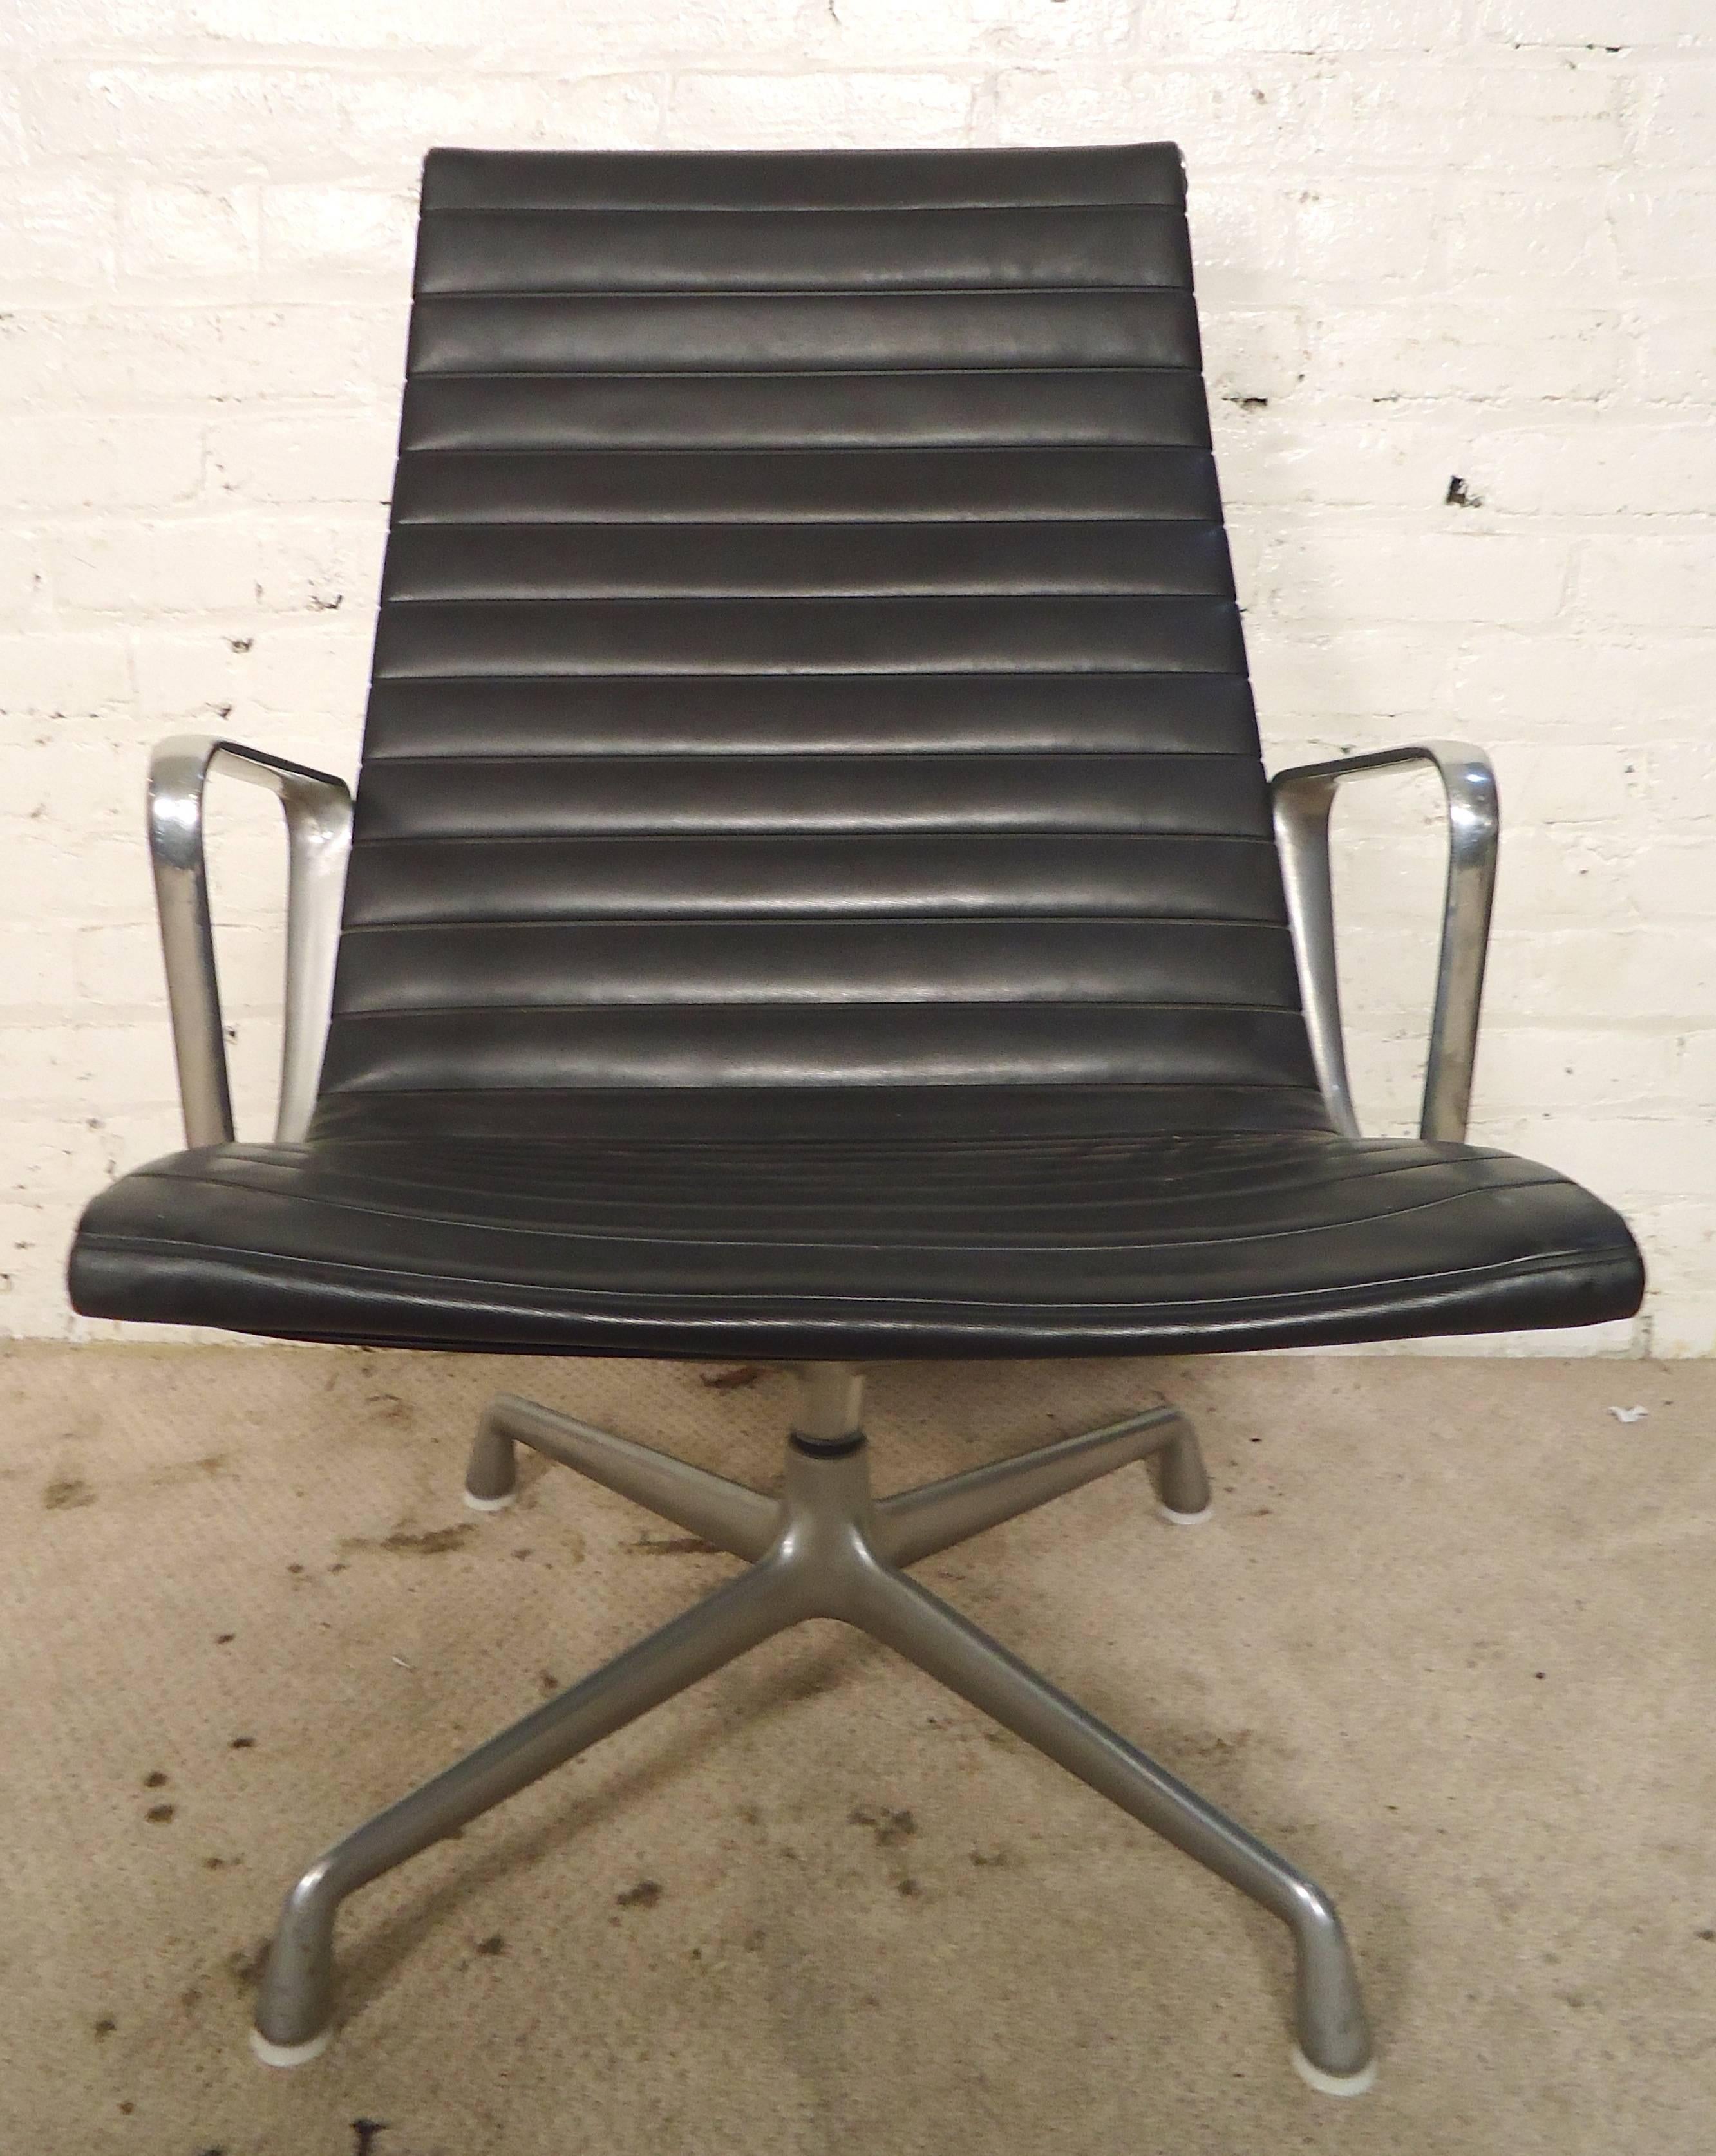 The classic mid-century modern office chair by Herman Miller in black. Strong aluminum frame with comfortable black cushioning, makes a great executive desk chair or living room lounger.

(Please confirm item location - NY or NJ - with dealer)
